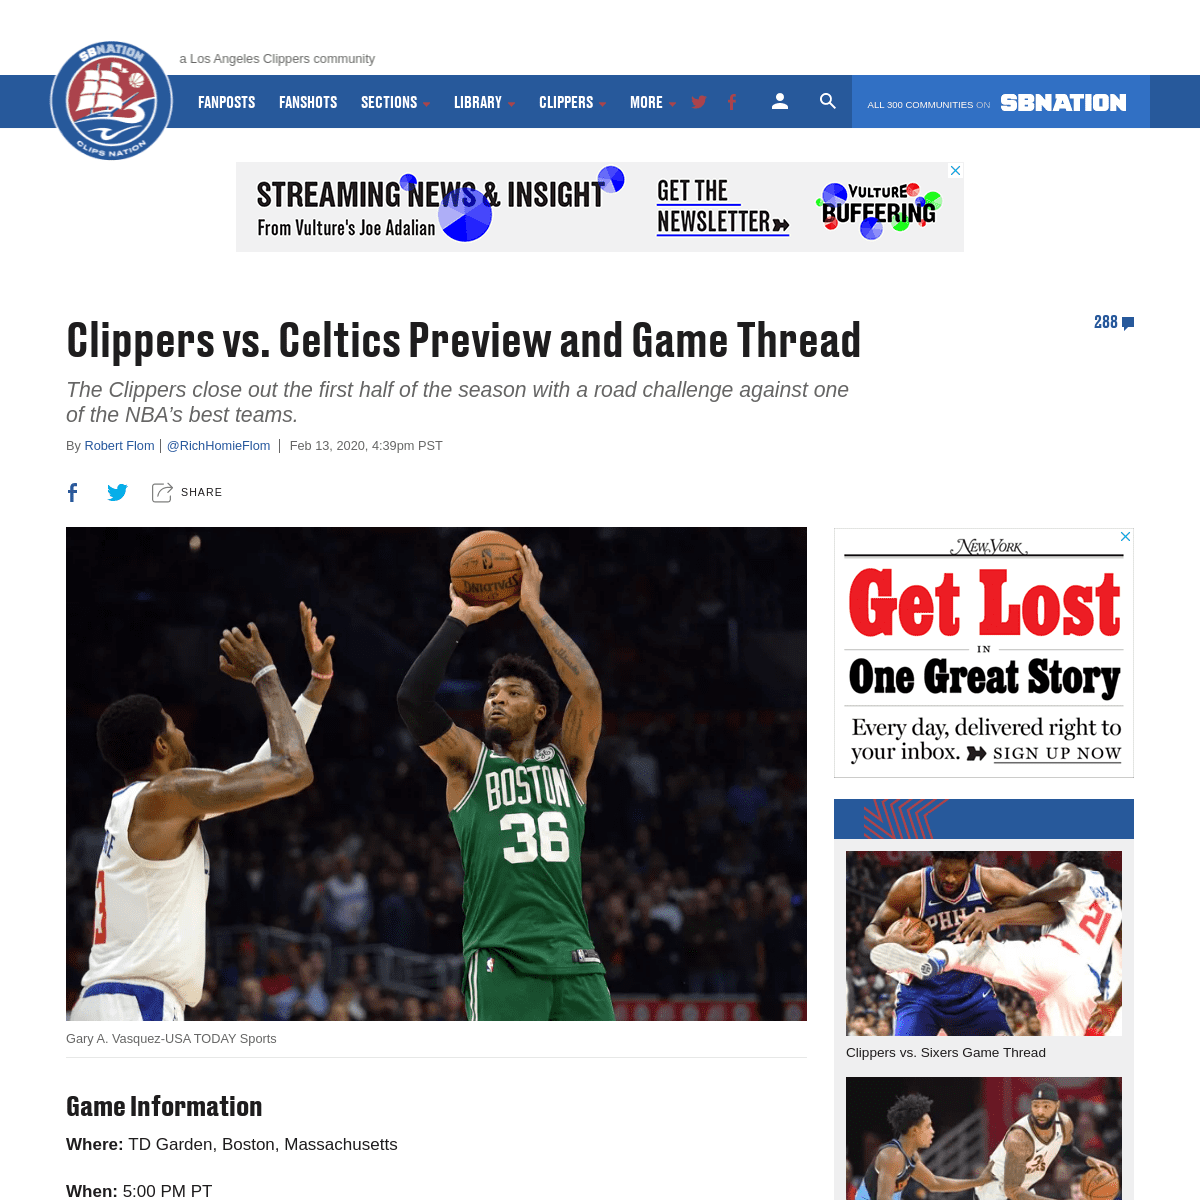 A complete backup of www.clipsnation.com/2020/2/13/21137059/clippers-vs-celtics-preview-and-game-thread